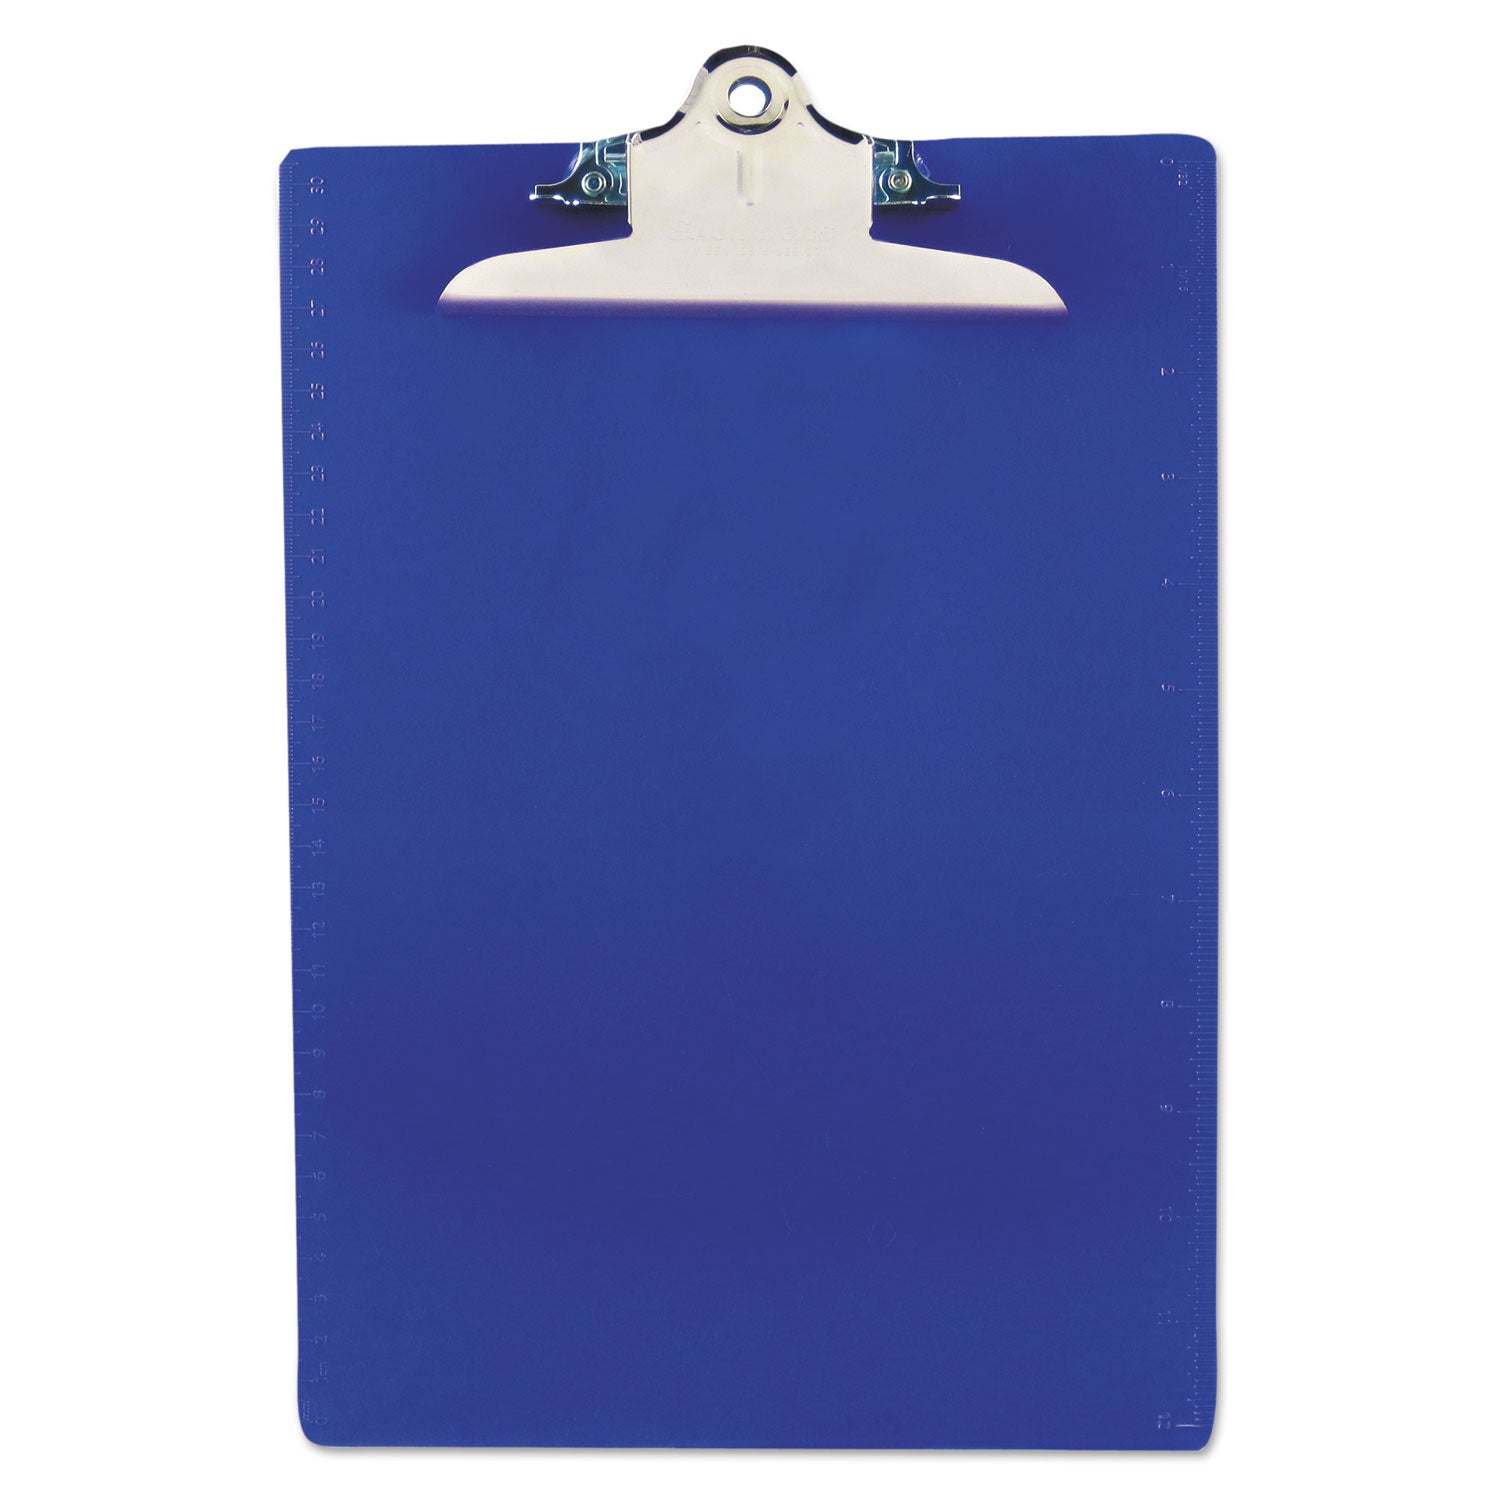 Recycled Plastic Clipboard with Ruler Edge, 1" Clip Capacity, Holds 8.5 x 11 Sheets, Blue - 